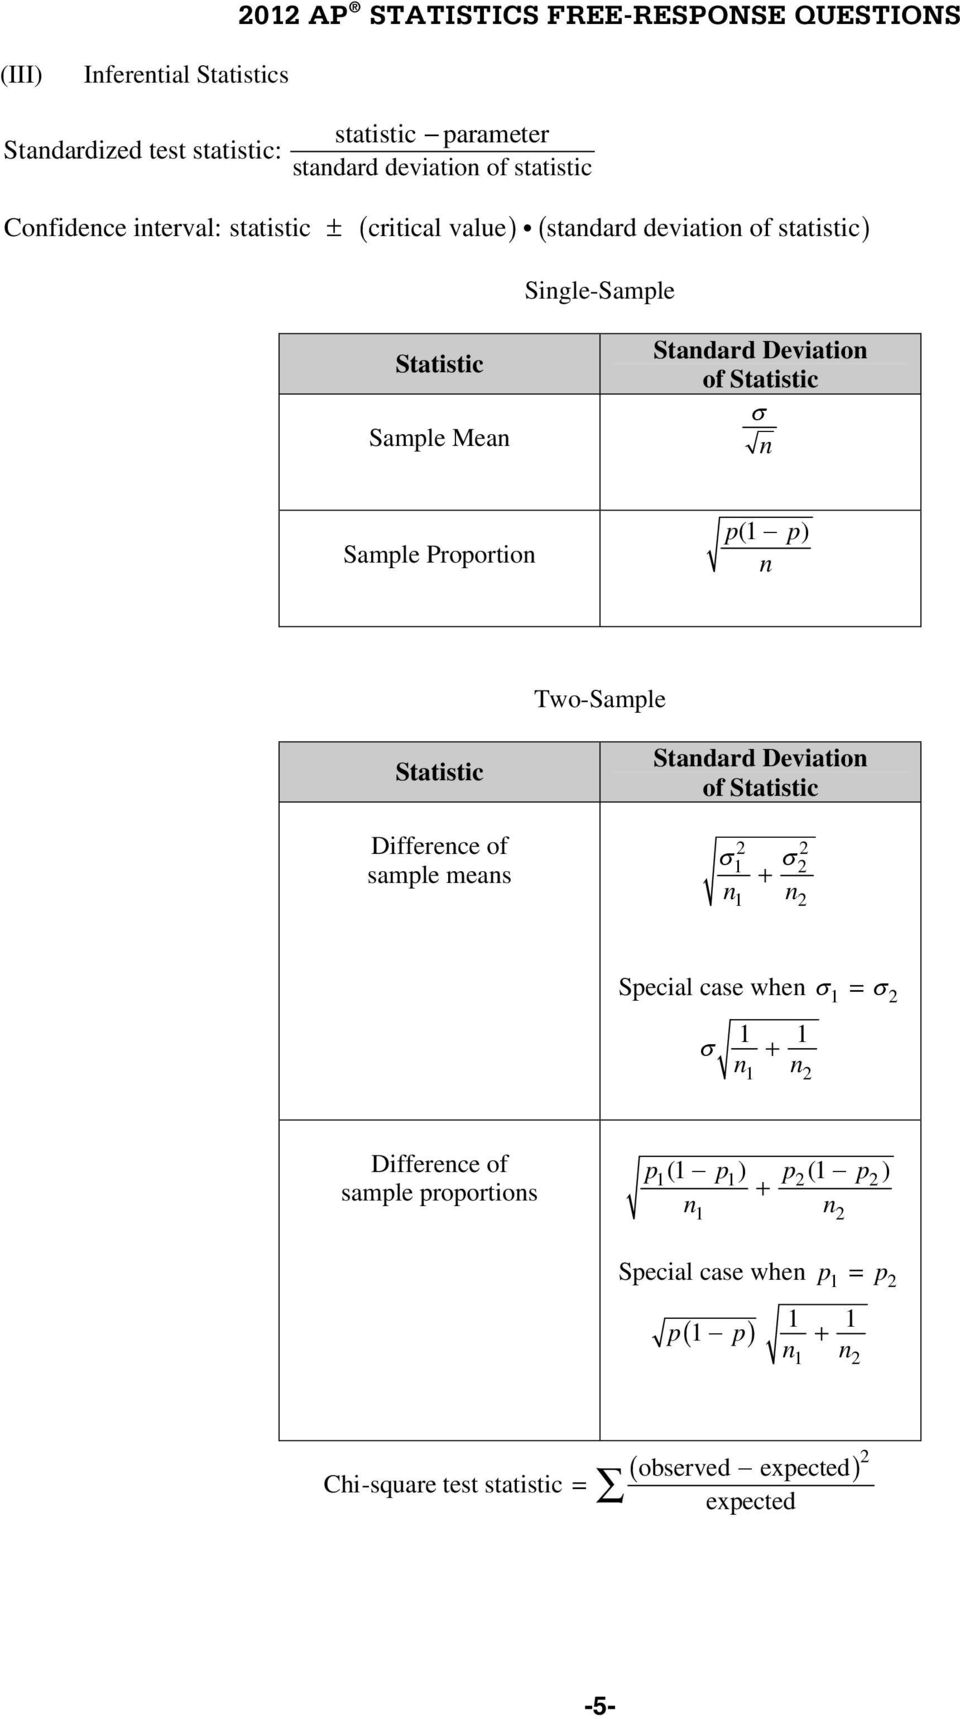 Statistic Difference of sample means Standard Deviation of Statistic s n 2 2 1 s2 + 1 n2 Special case when s1 = s2 1 1 s + n n 1 2 Difference of sample